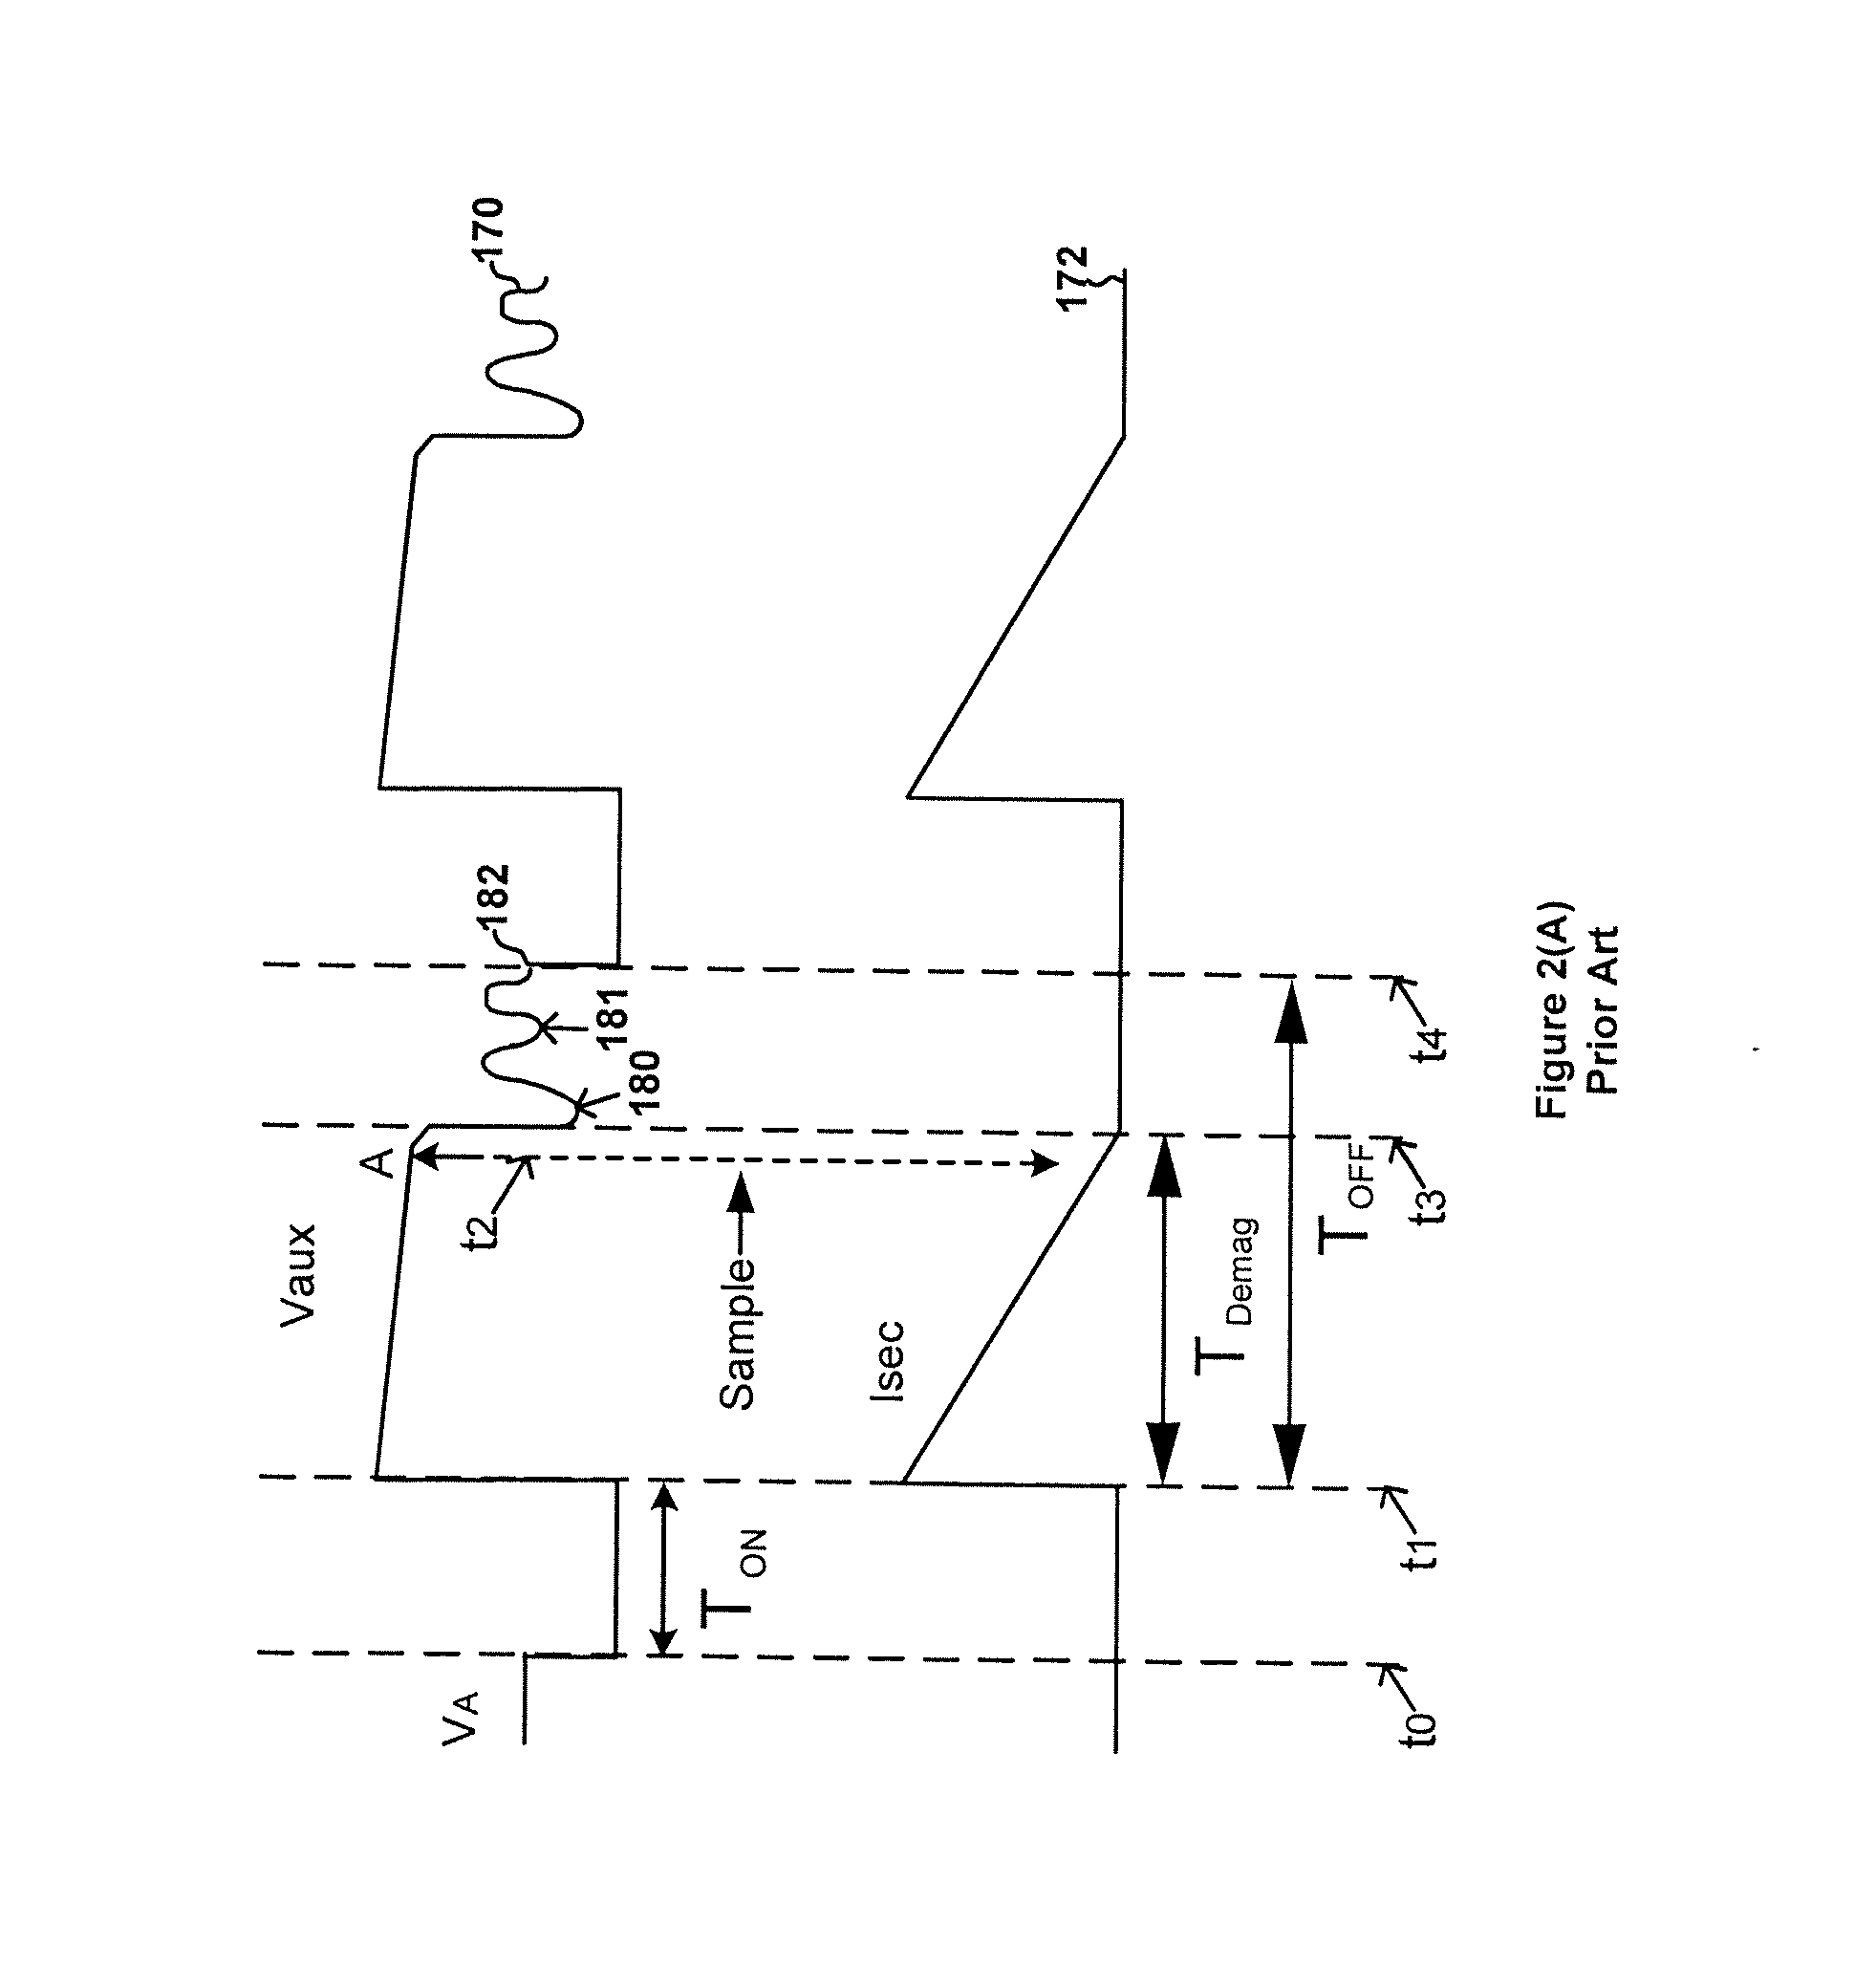 Systems and methods for voltage control and current control of power conversion systems with multiple operation modes